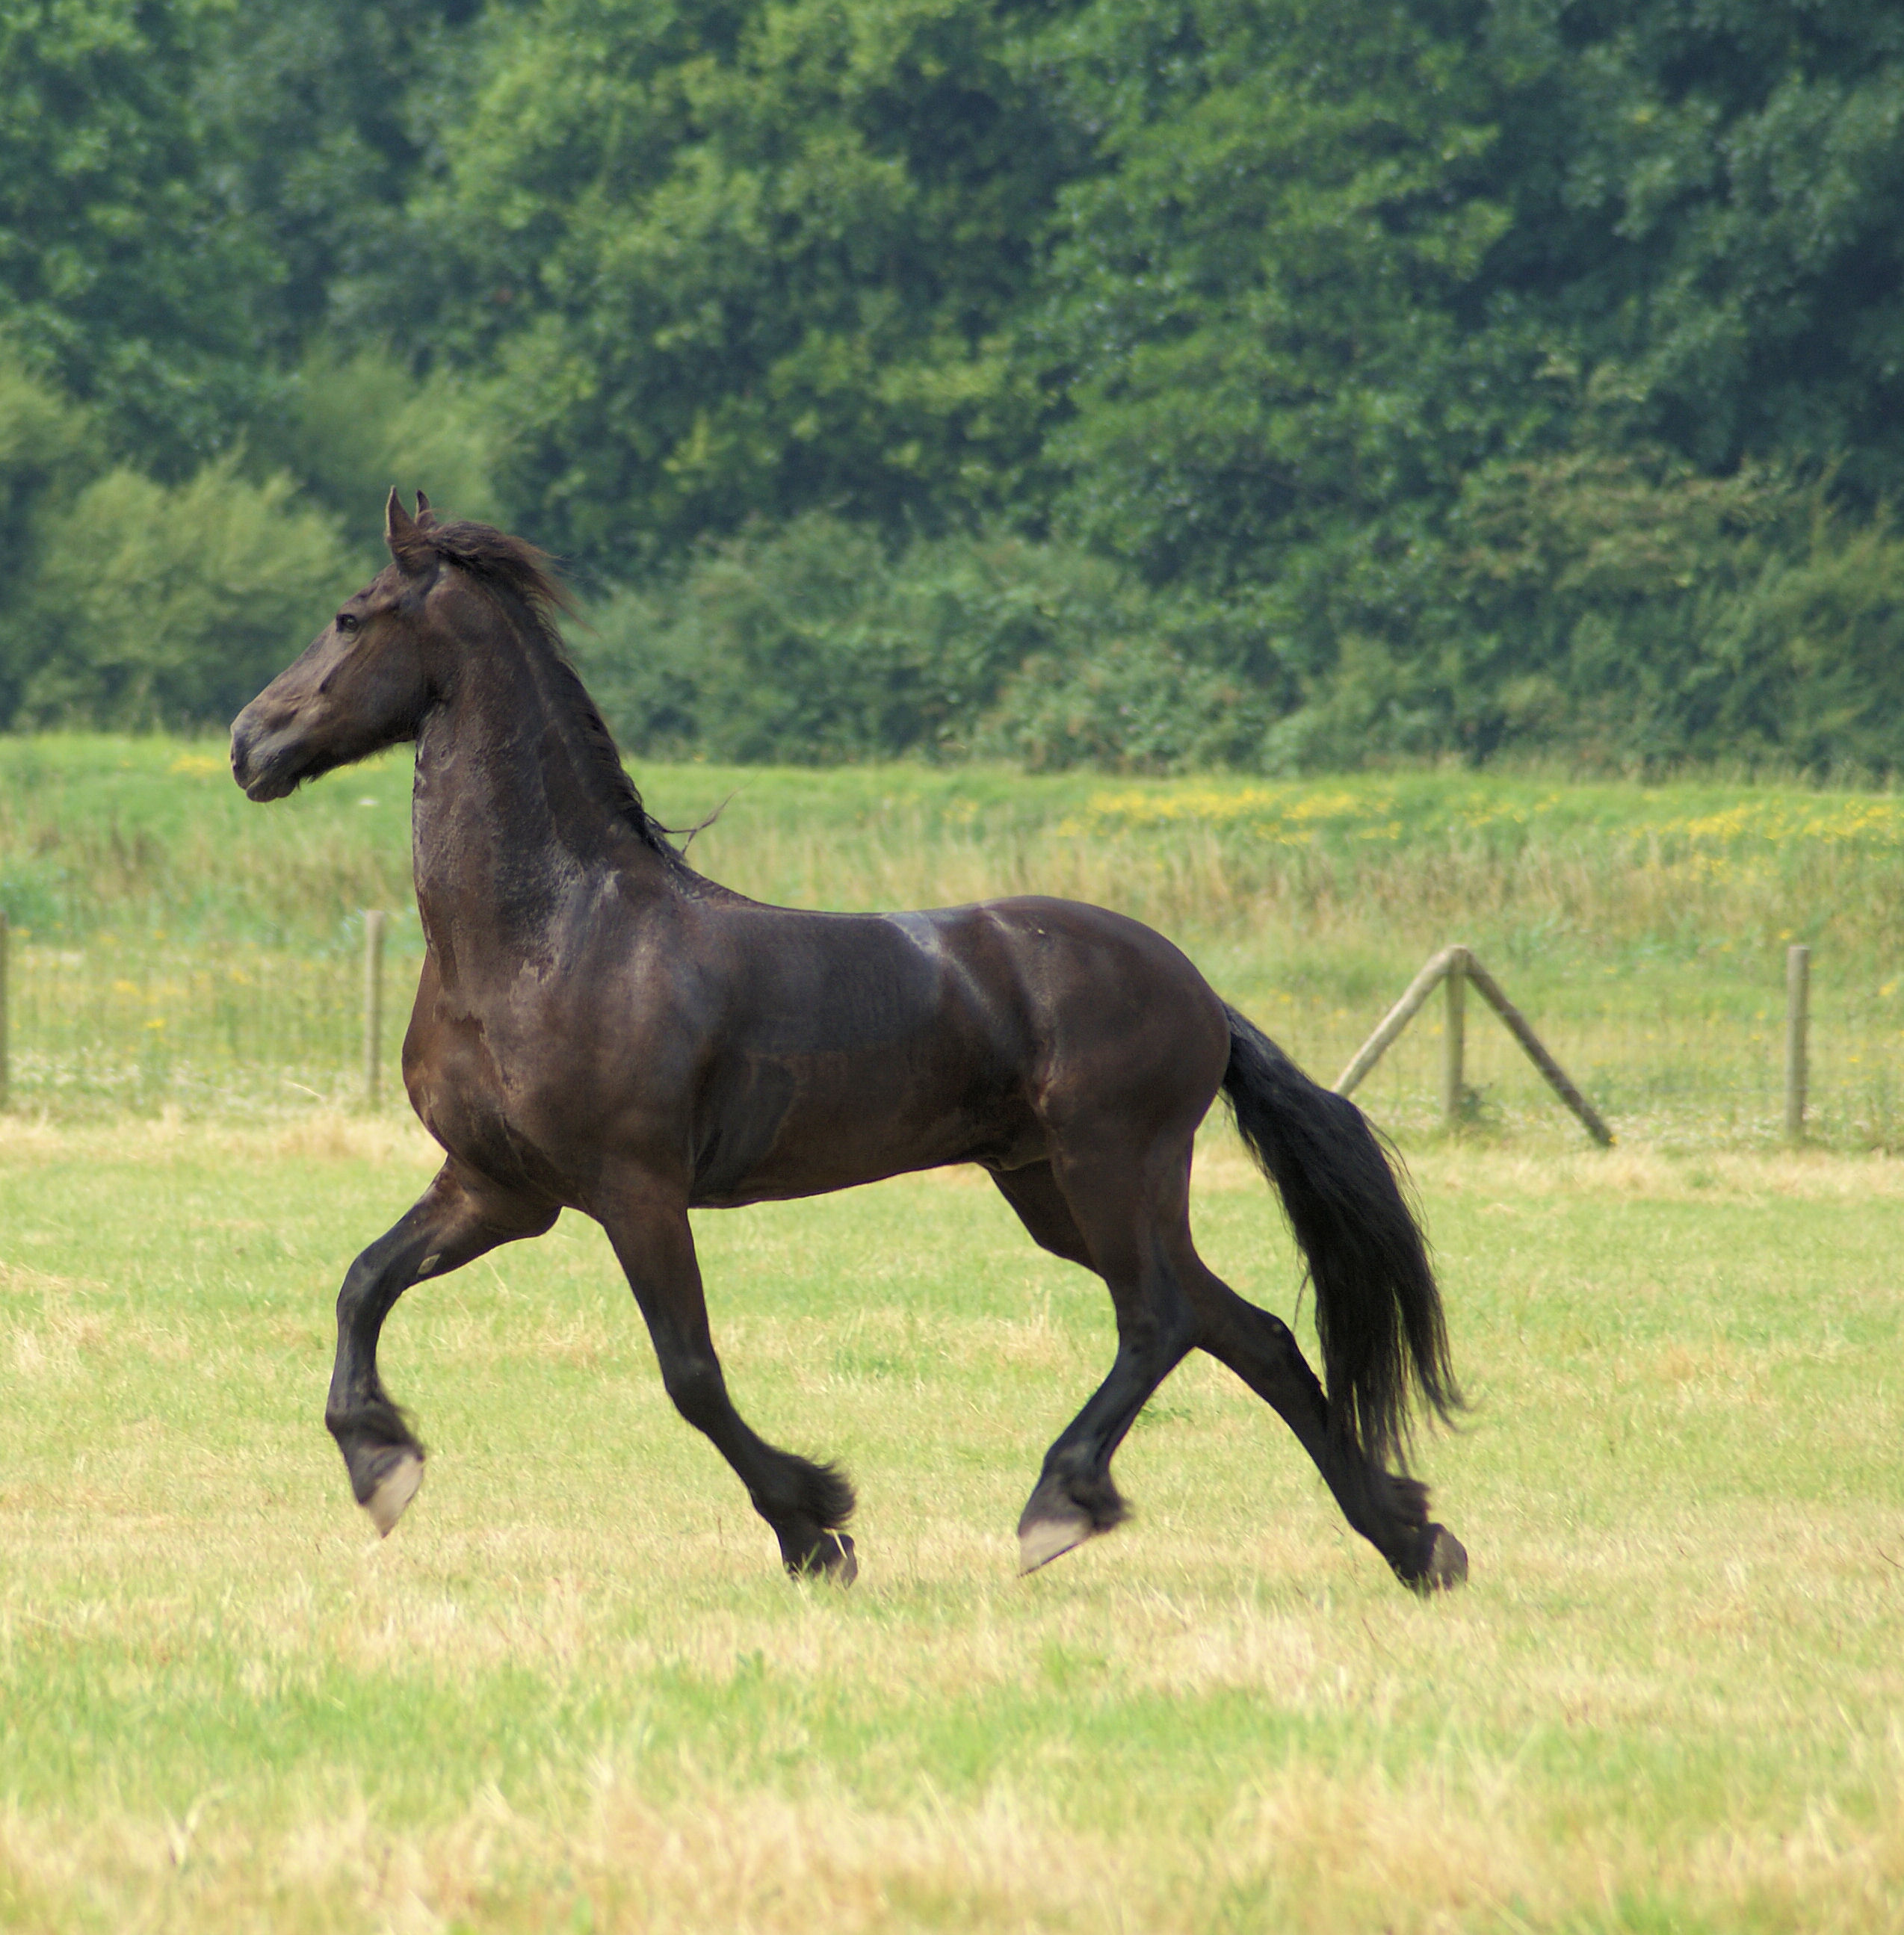 Horse in the netherlands photo